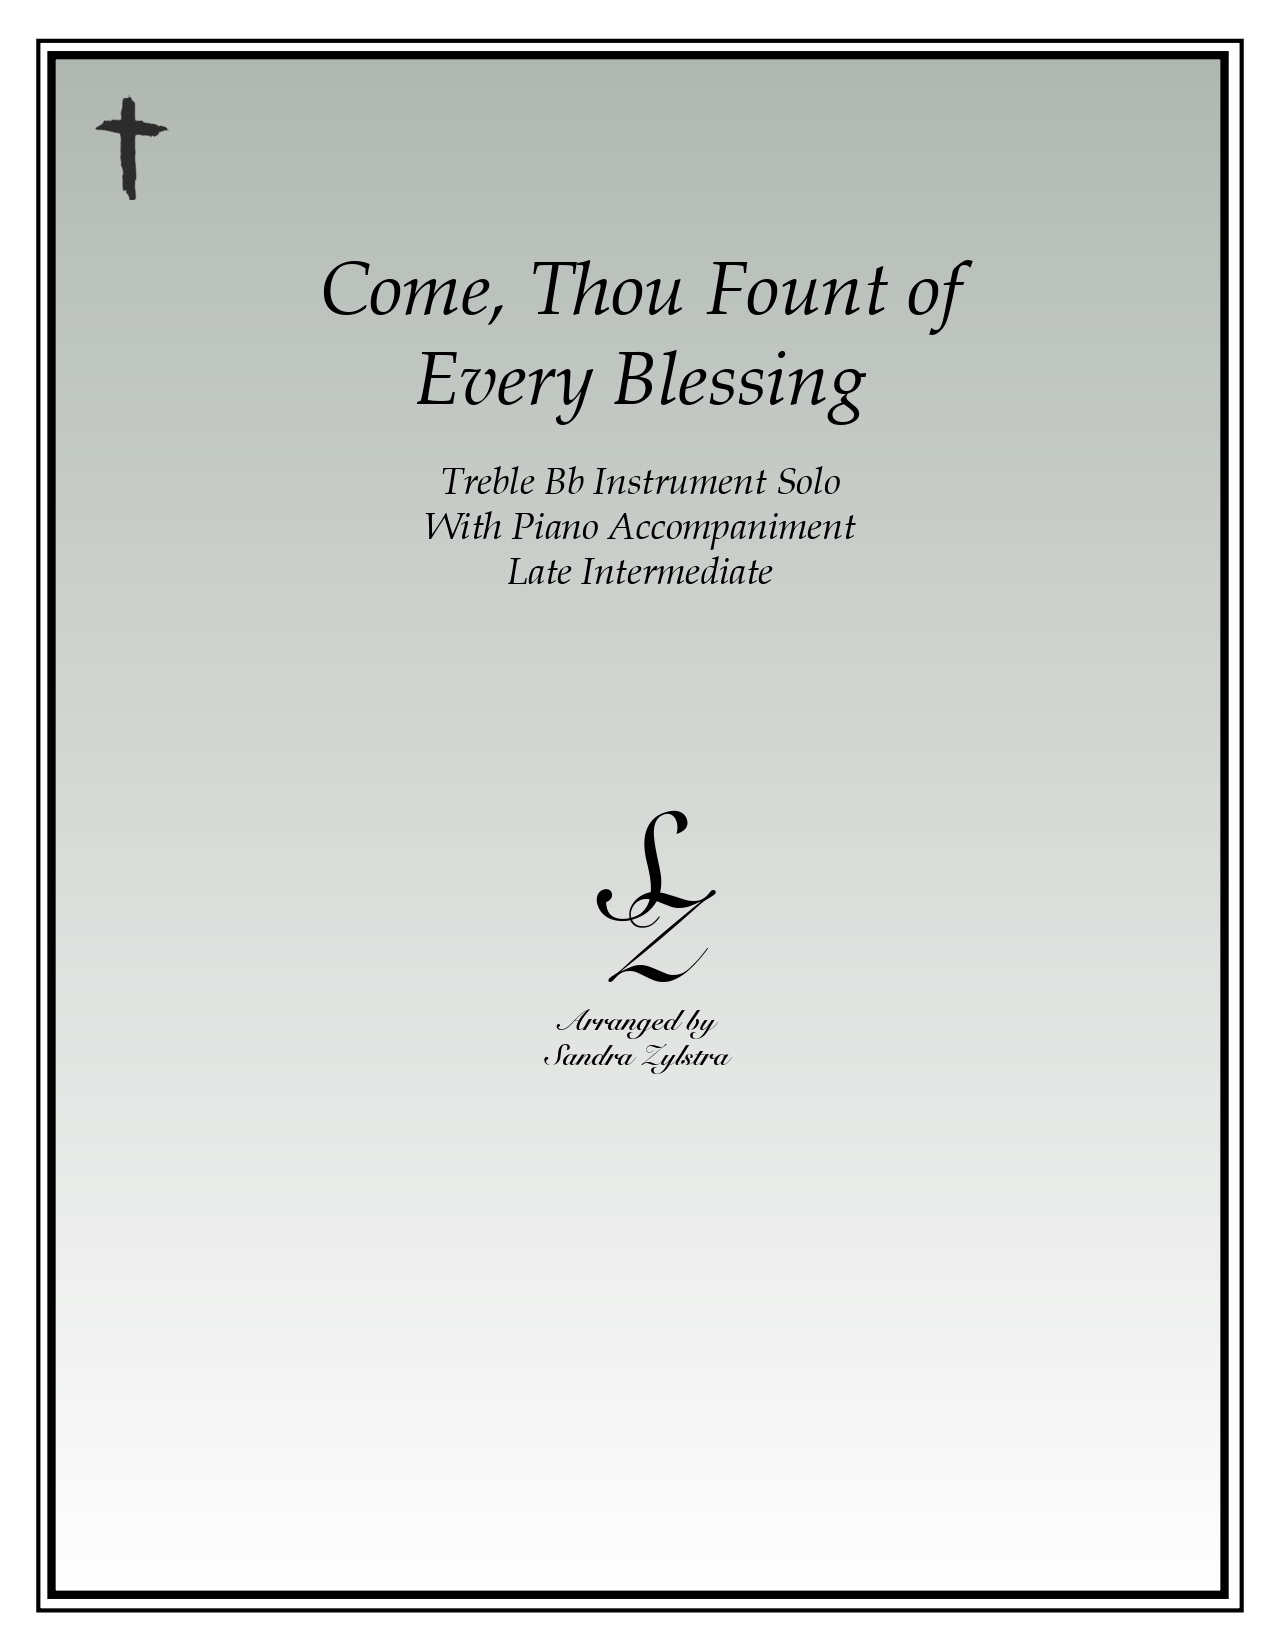 Come Thou Fount Of Every Blessing Bb instrument solo part cover page 00011